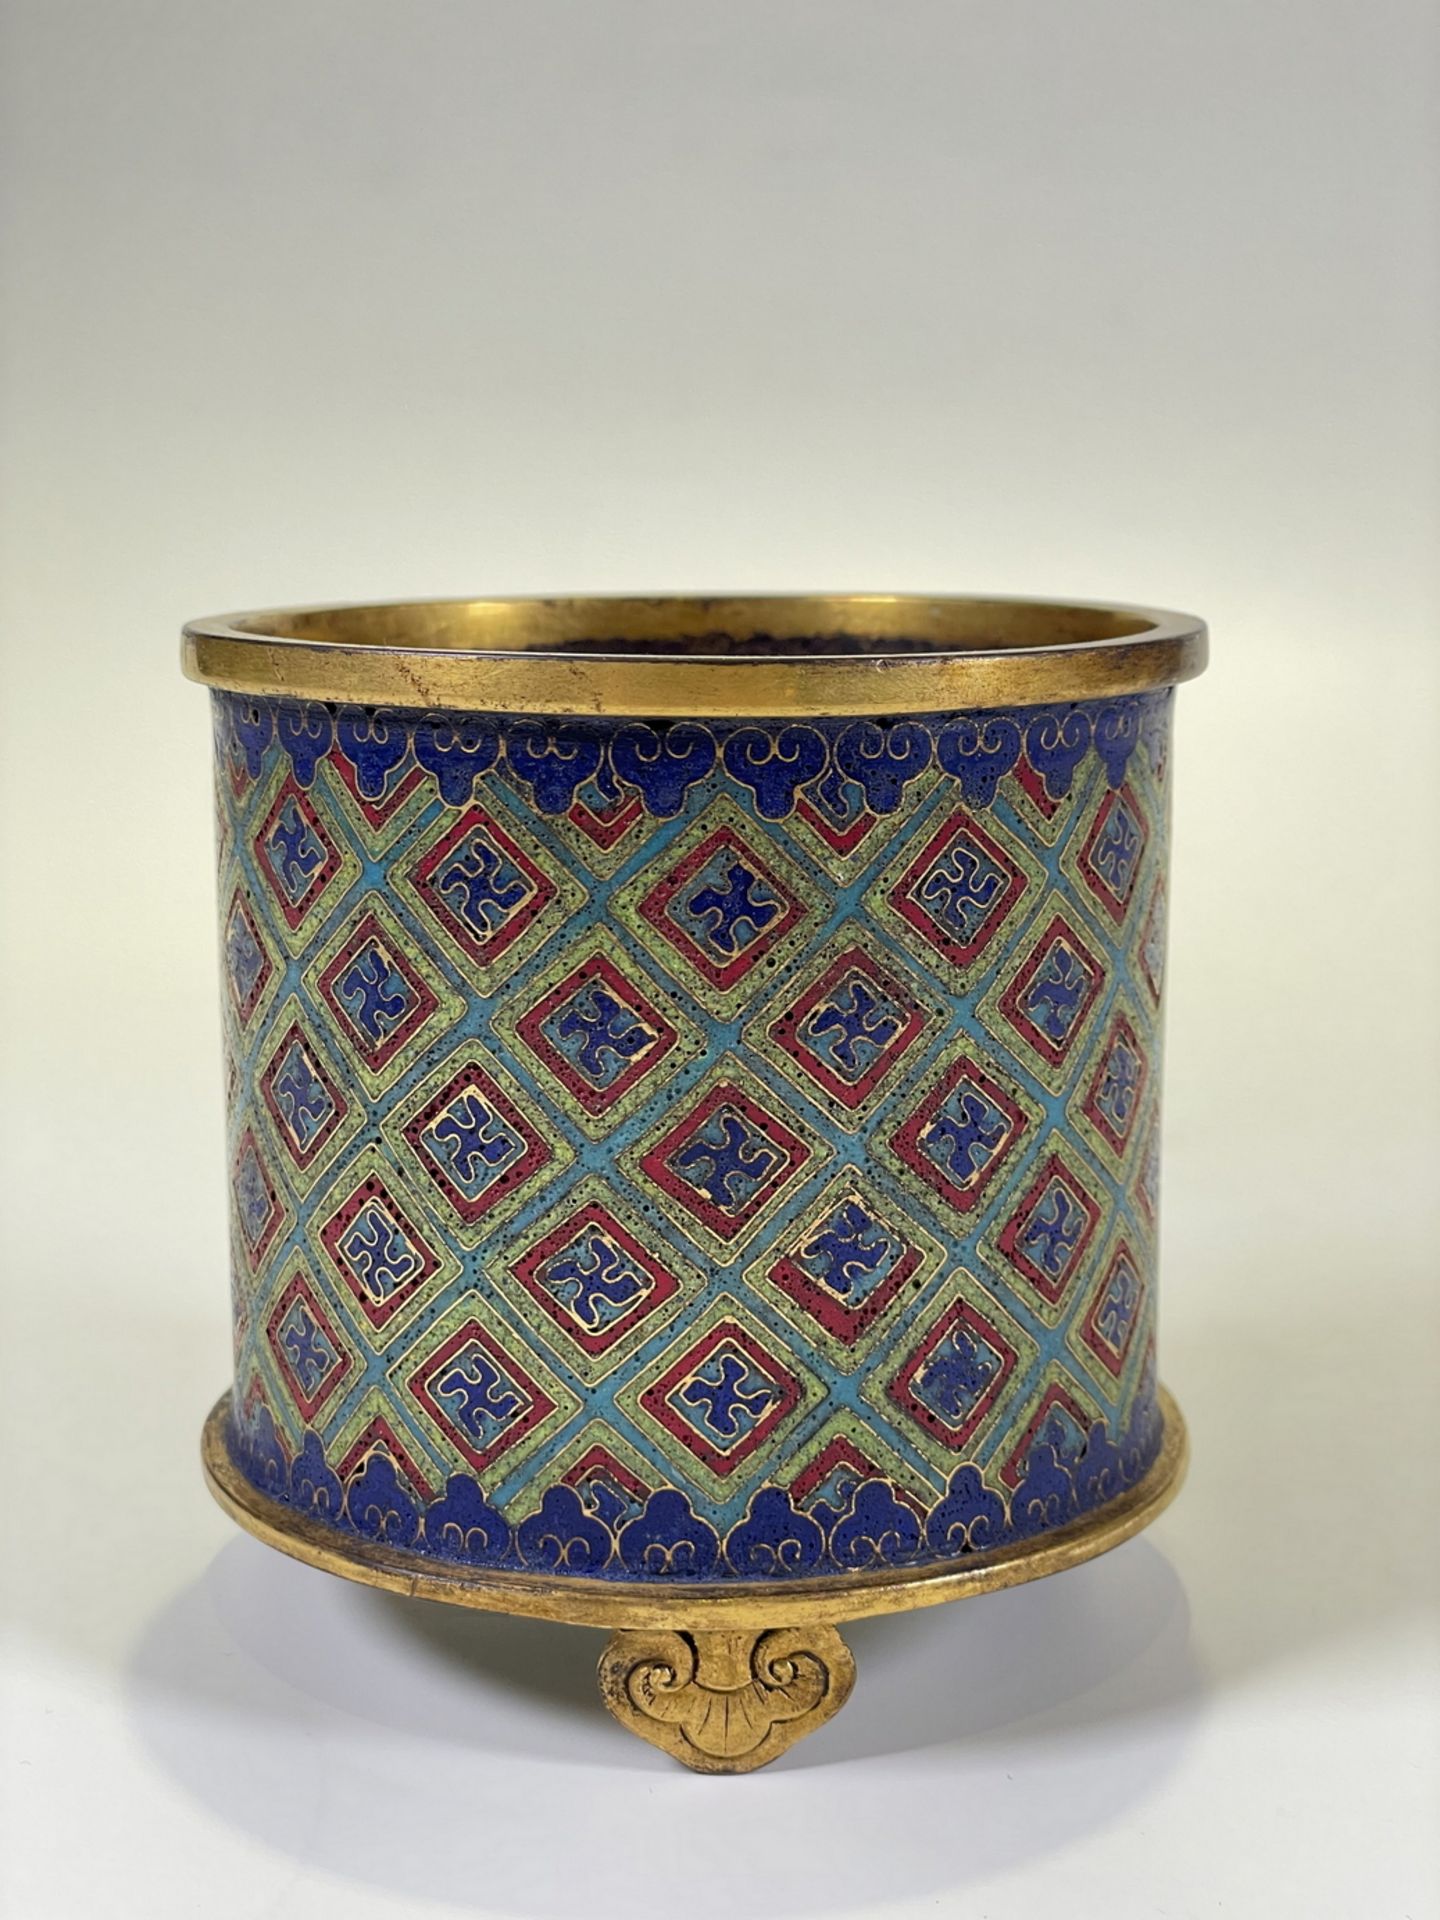 FINE CHINESE CLOISONNE, 18TH/19TH Century Pr. Collection of NARA private gallary.  - Bild 2 aus 11